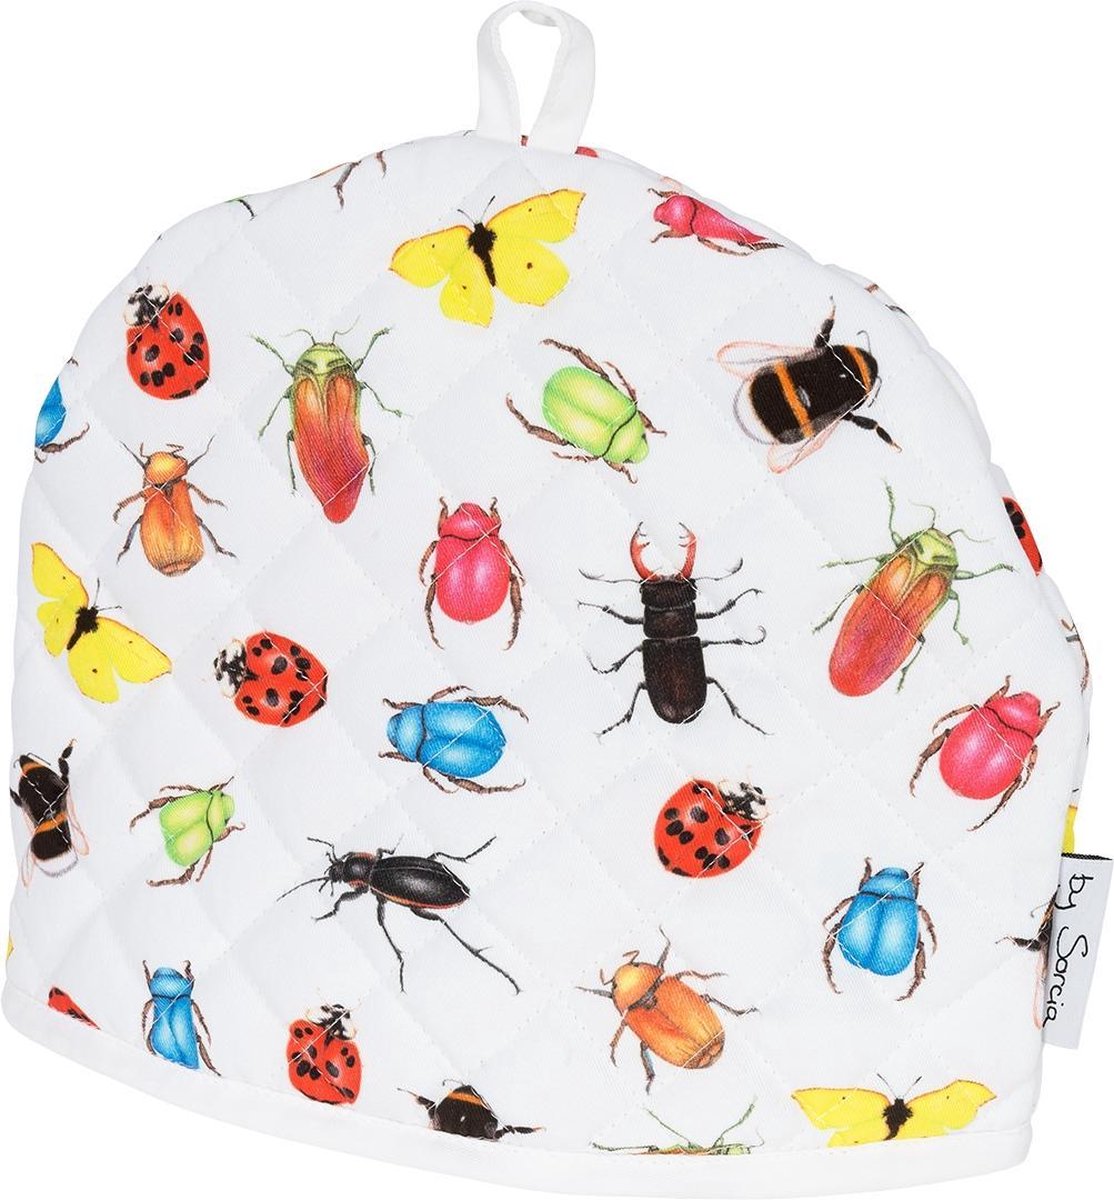 by Sorcia - theemuts Colourfull Insects - 30x25cm - katoen - designed in Holland - by Sorcia